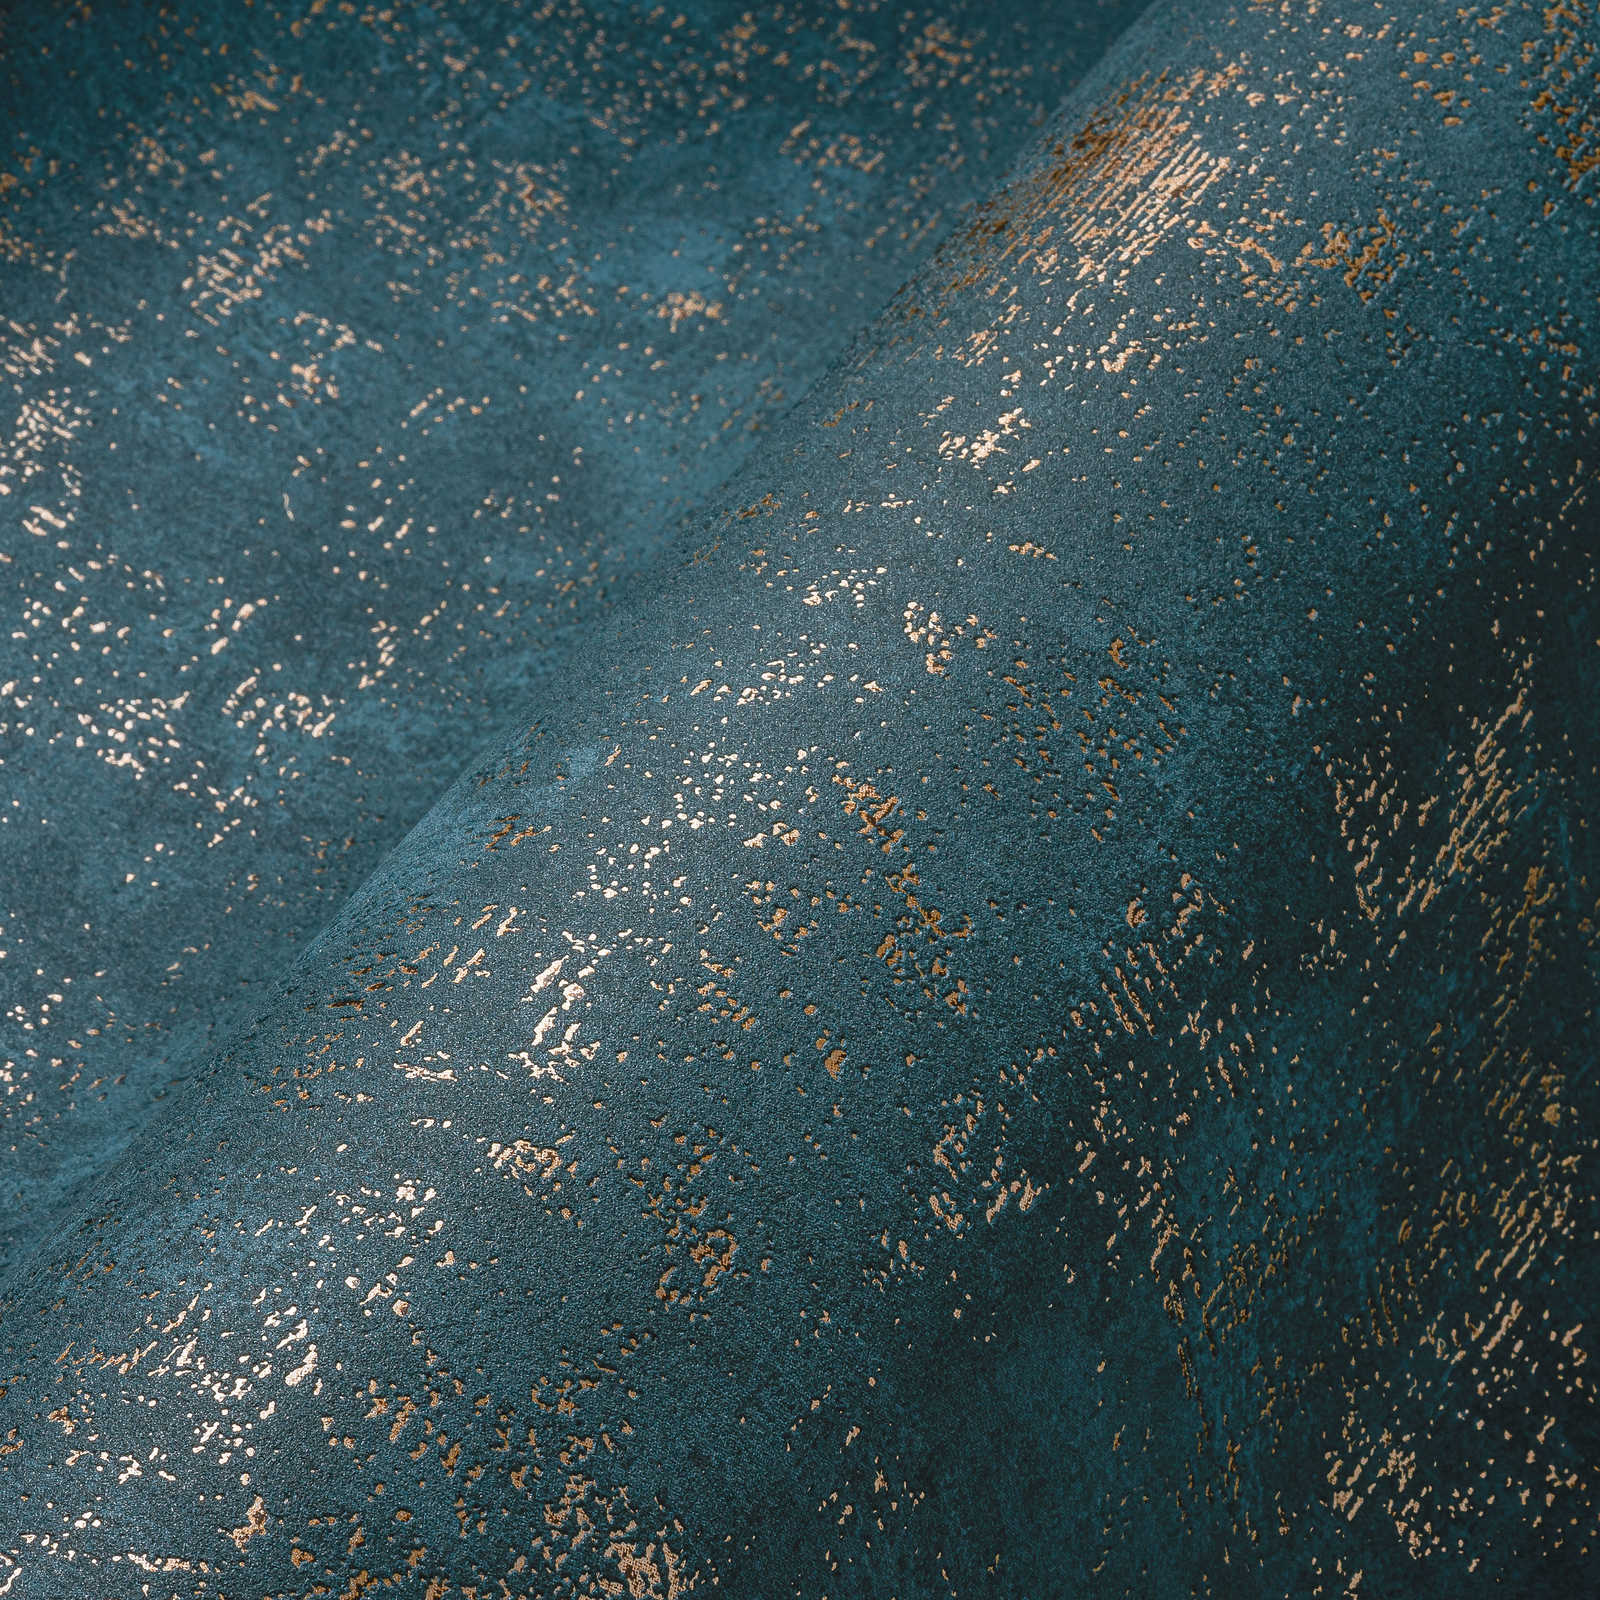             Blue wallpaper with gold metallic accent and texture details
        